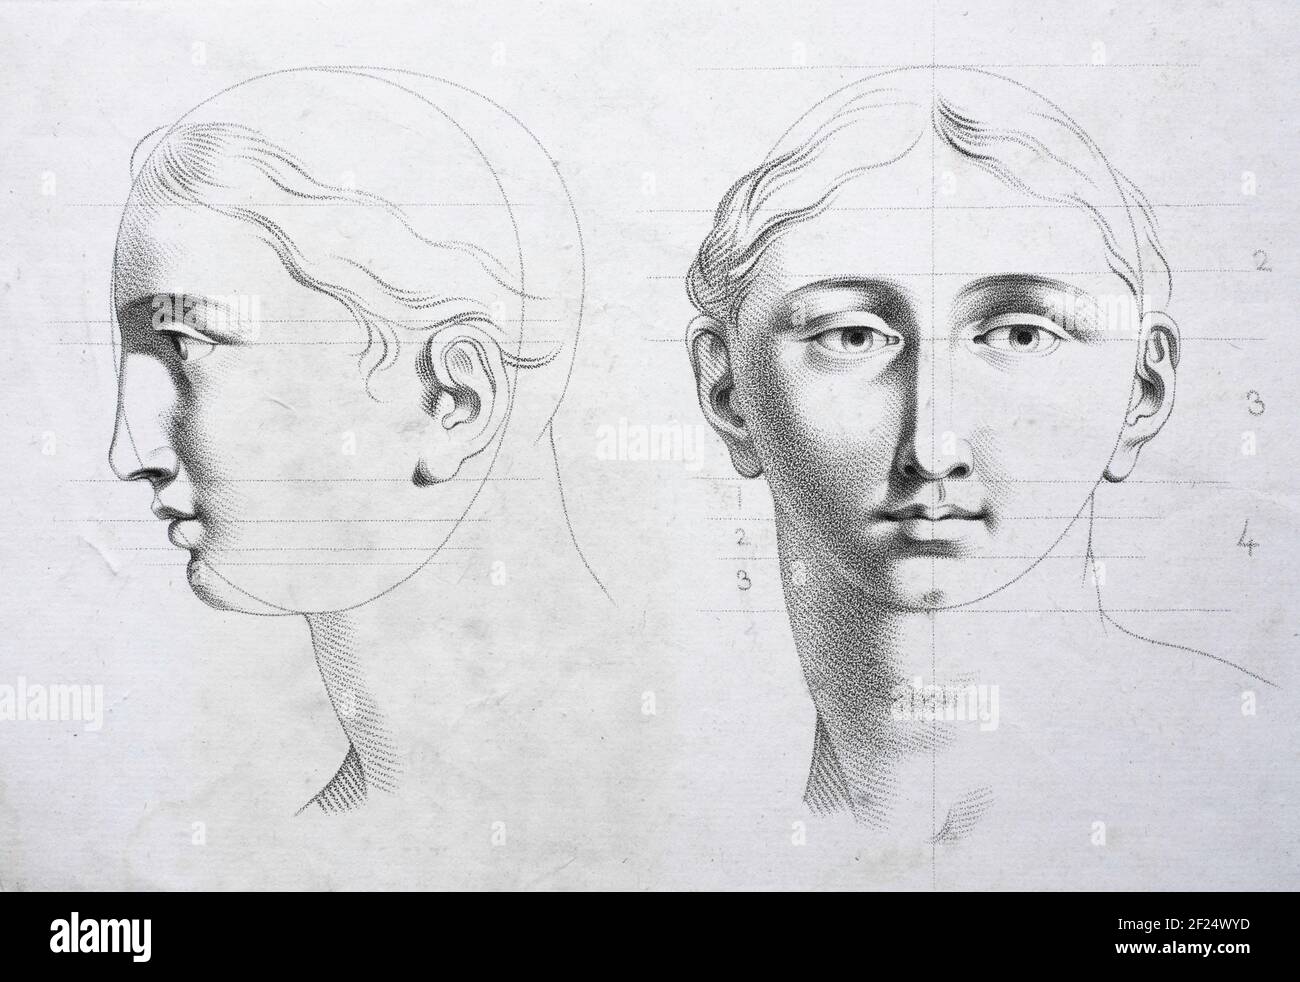 How to draw face side view